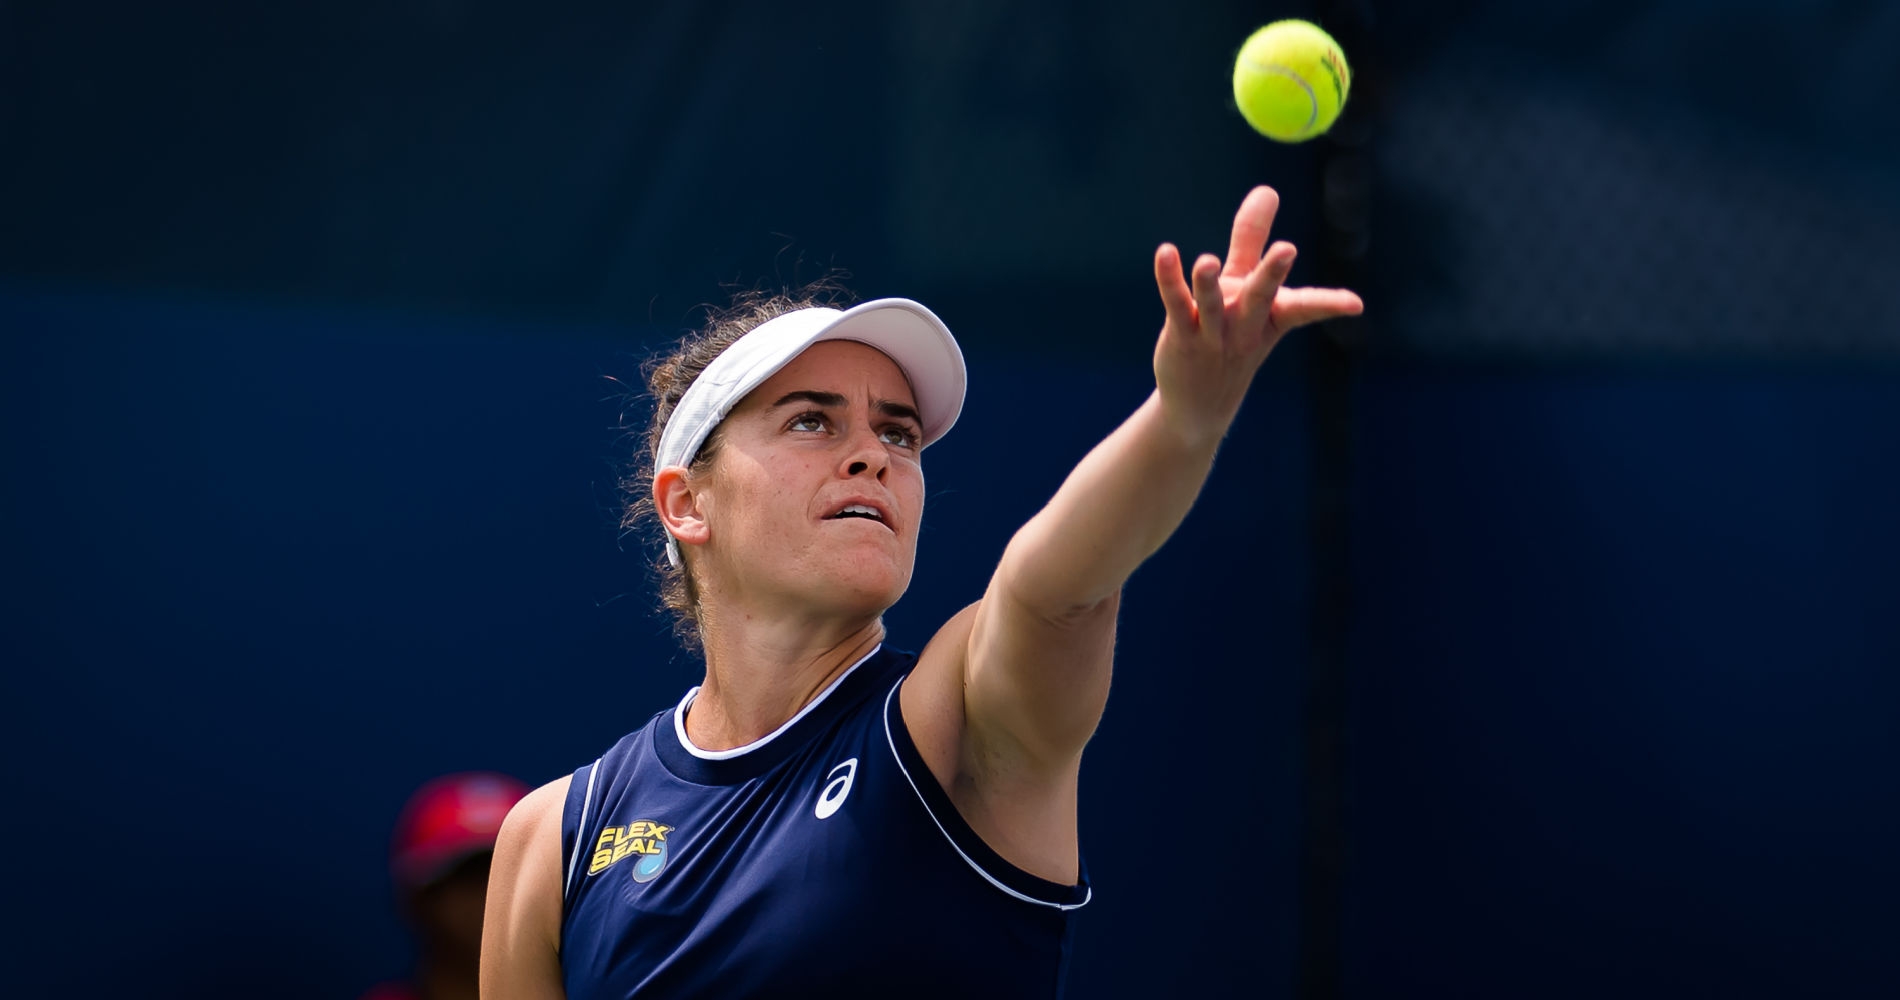 US Open Brady continues comeback, knocking out No 24 seed Linette